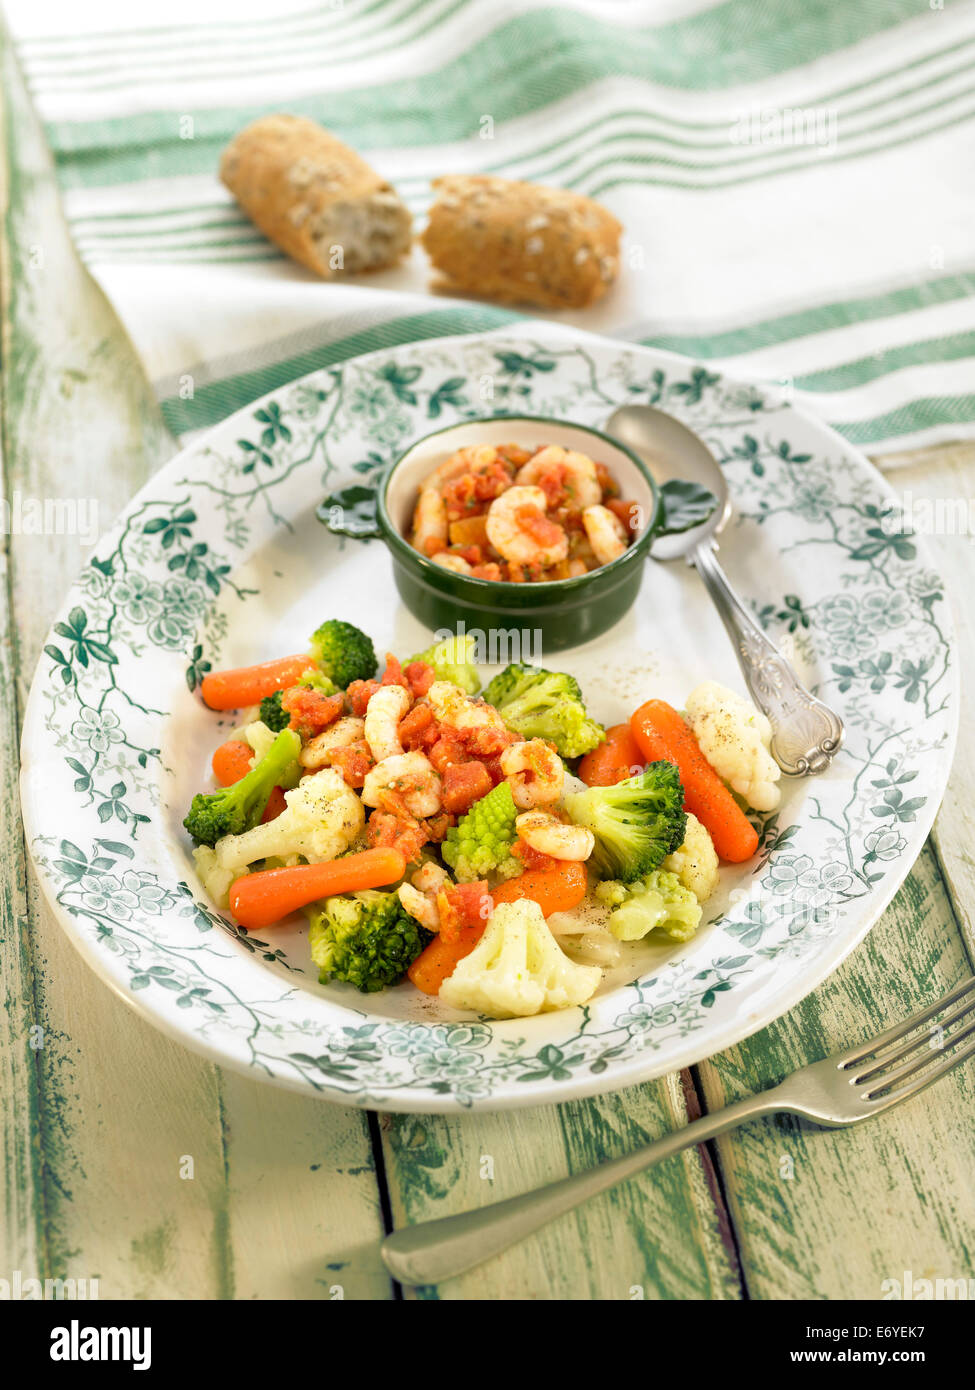 Steamed vegetables with shrimps in sauce Stock Photo